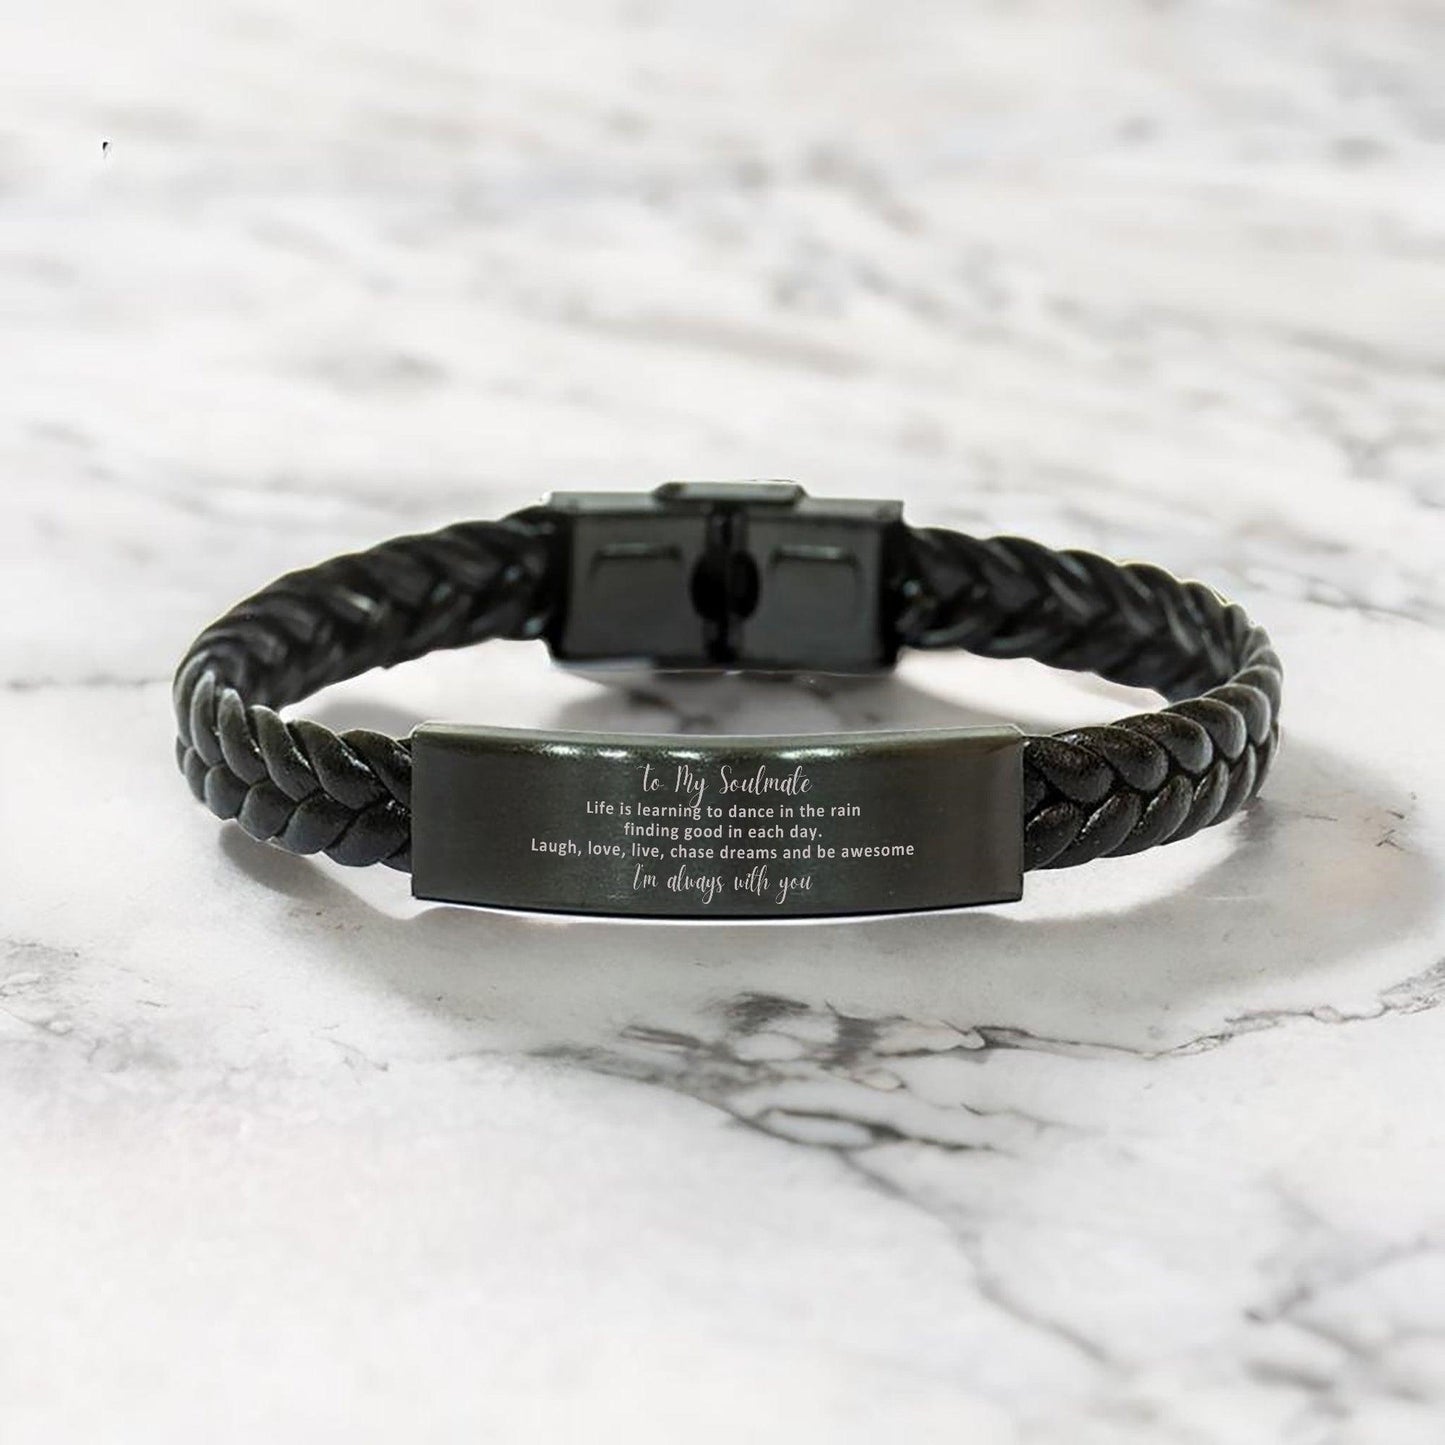 Heartfelt Soulmate Braided Leather Engraved Bracelet - Life is Learning to Dance in the Rain, I'm always with you - Birthday, Christmas Holiday Gifts - Mallard Moon Gift Shop